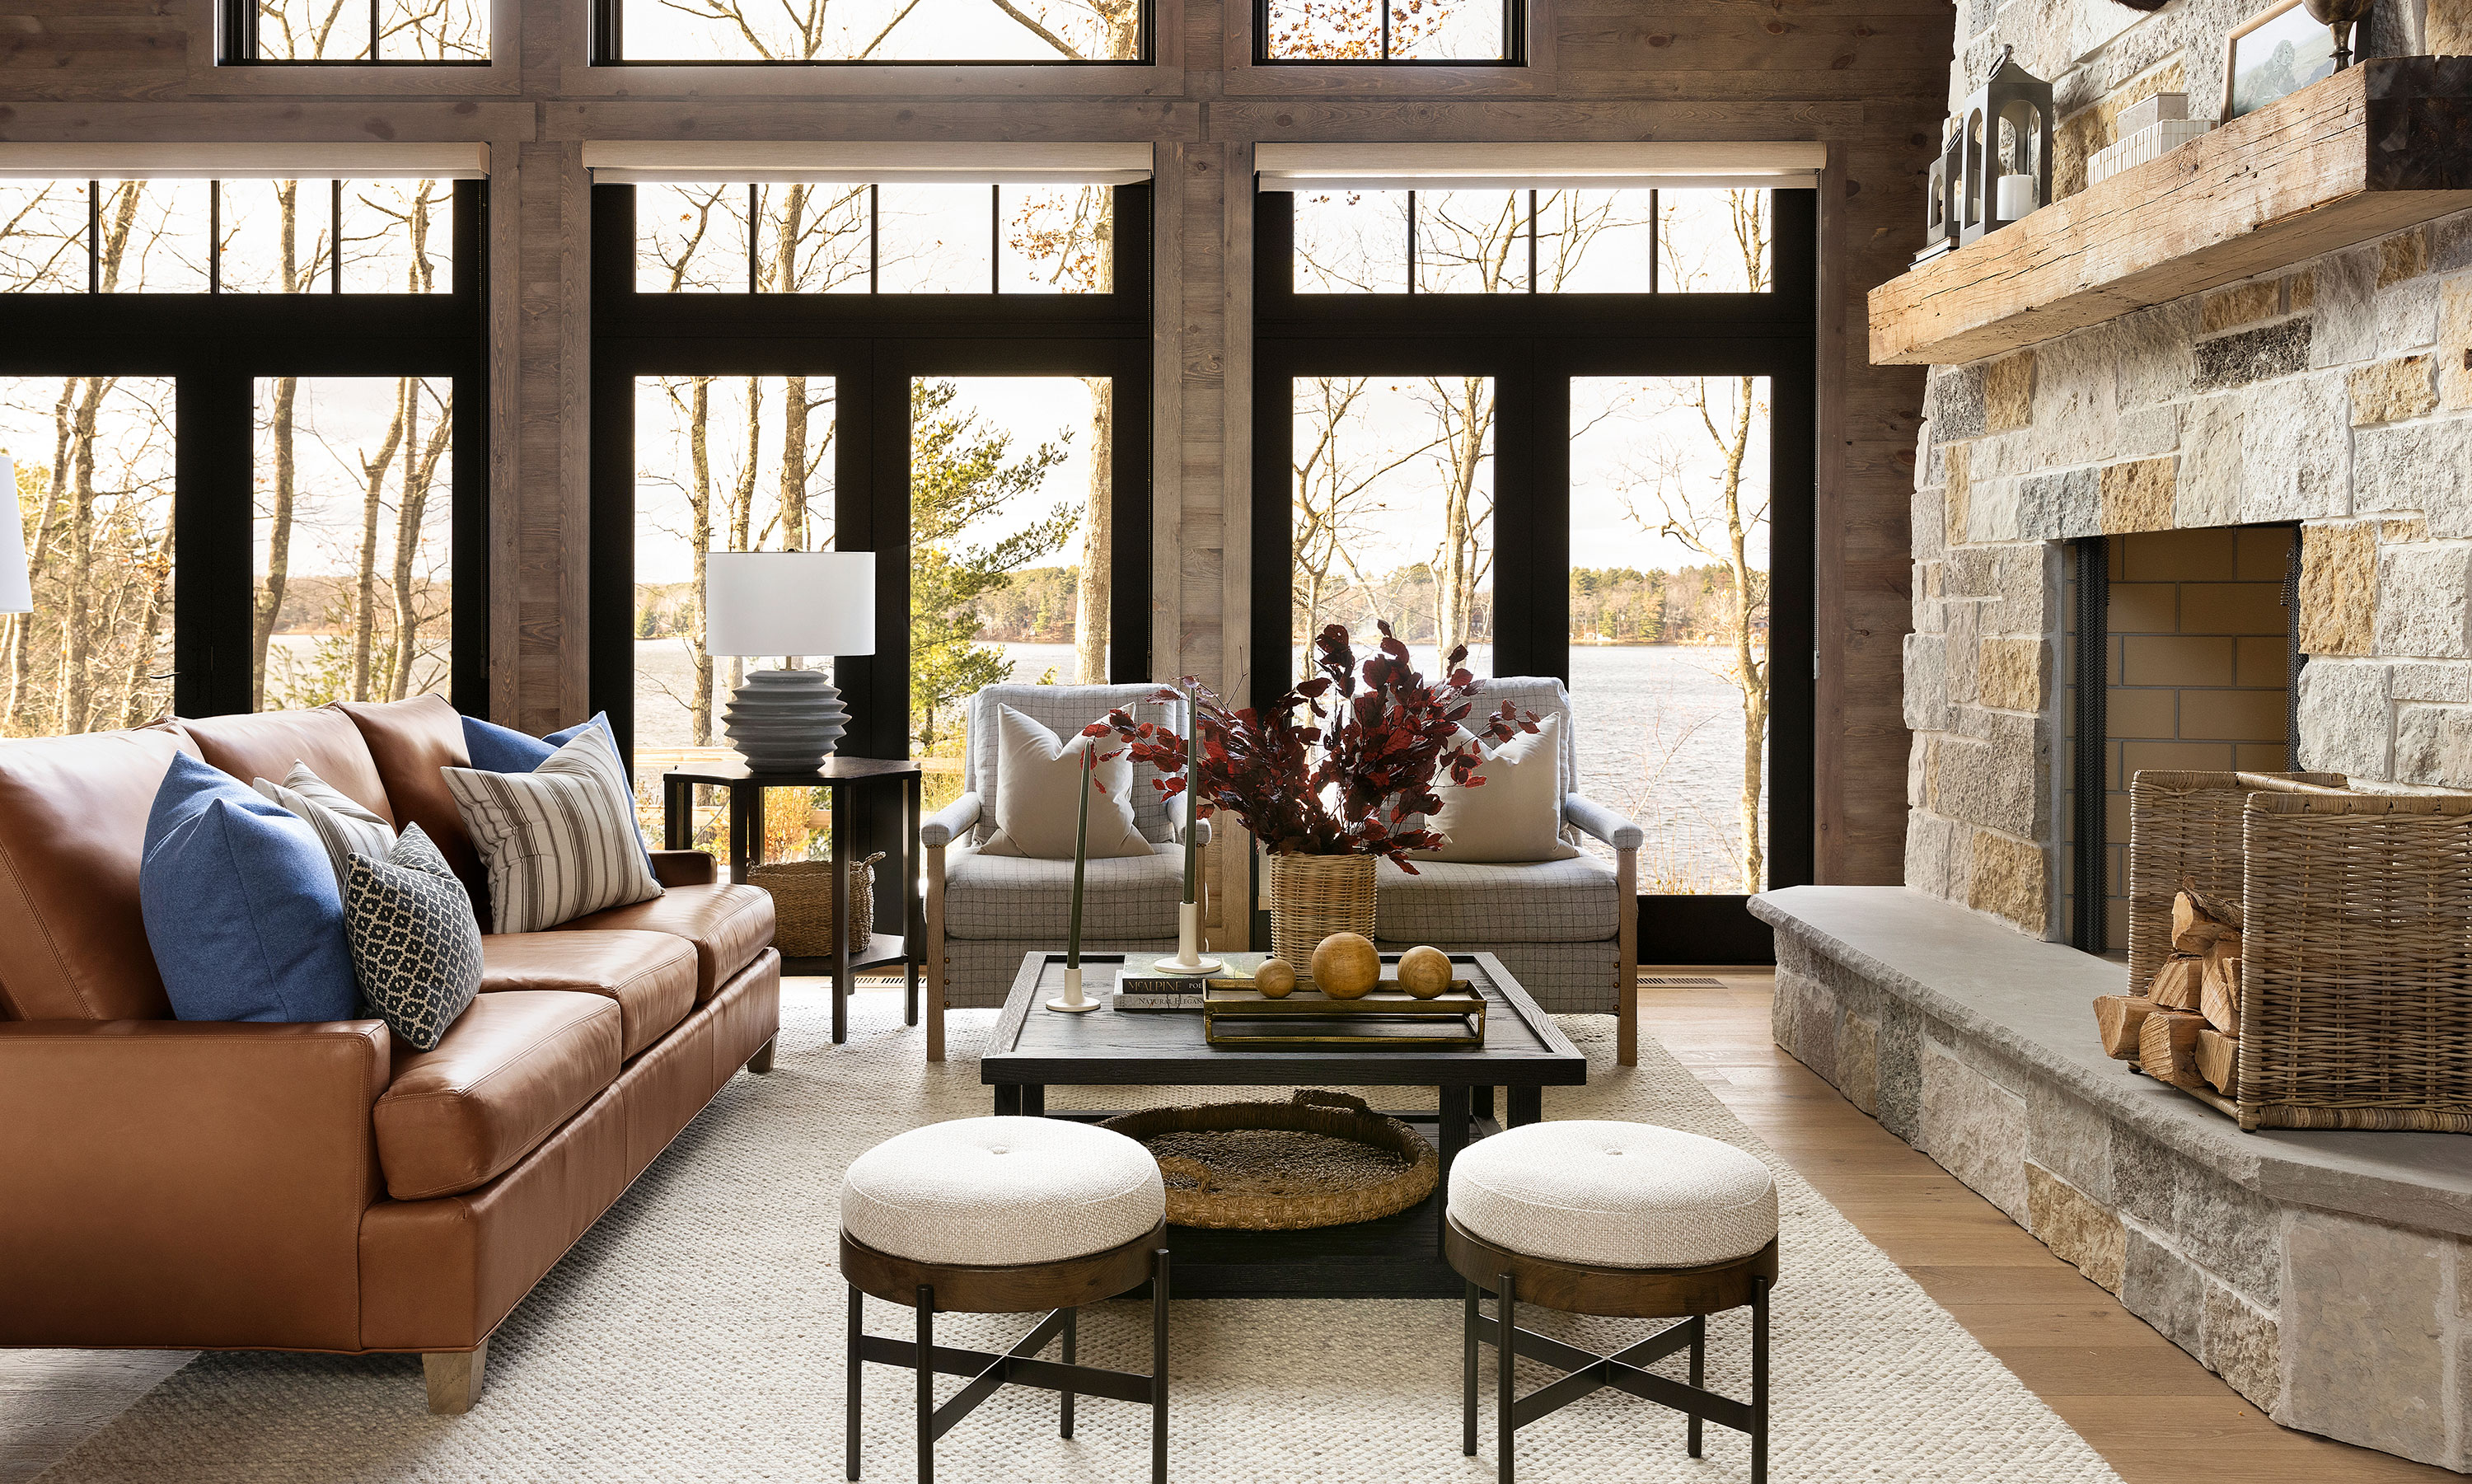 35 Homey Elements To Include In A Rustic Décor